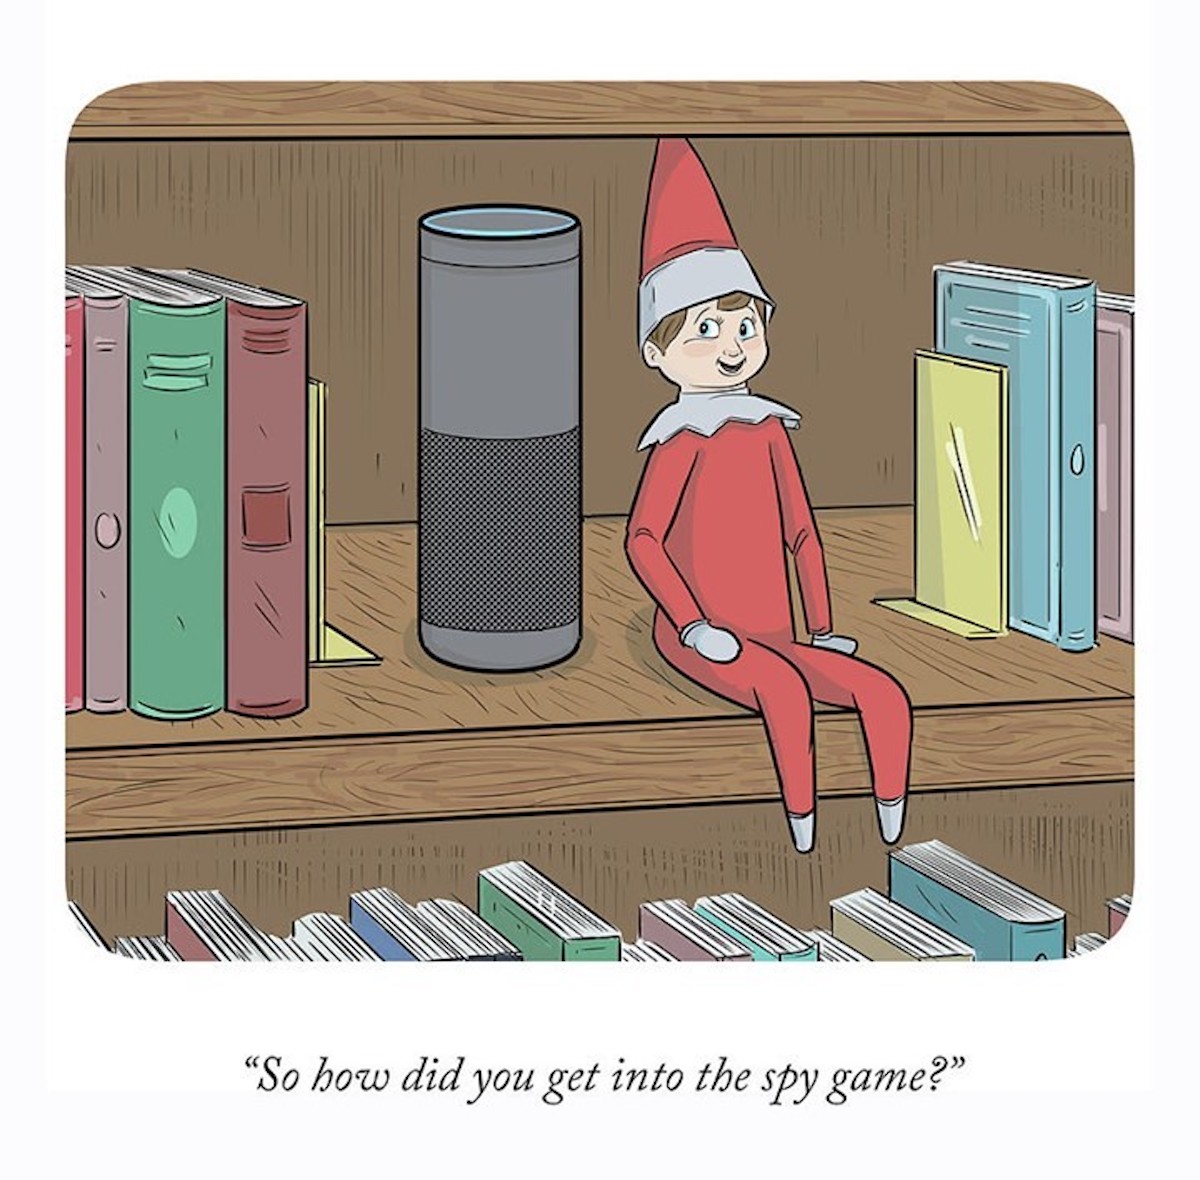 An illustration of Elv on a Shelf sitting next to an Amazon Echo device. The elv is asking the voice assistant how it got into the spy game.